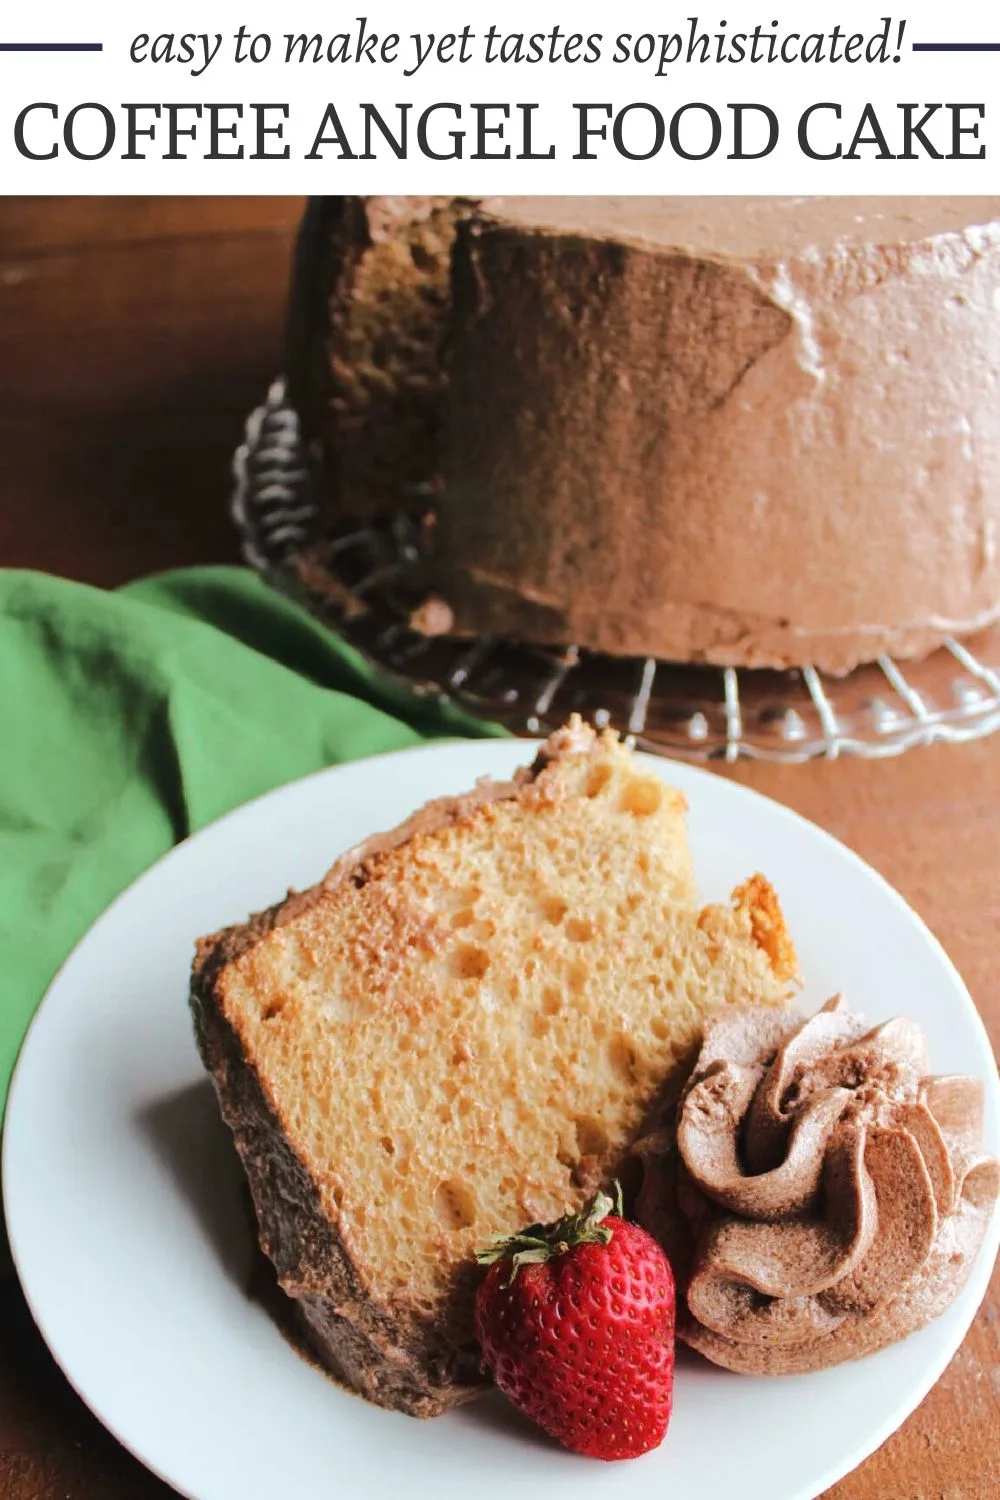 Coffee angel food cake is every bit as light and airy as you would expect with just the right amount of coffee flavor baked in. This recipe starts with a cake mix, so it is easy to put together but still tastes amazing.